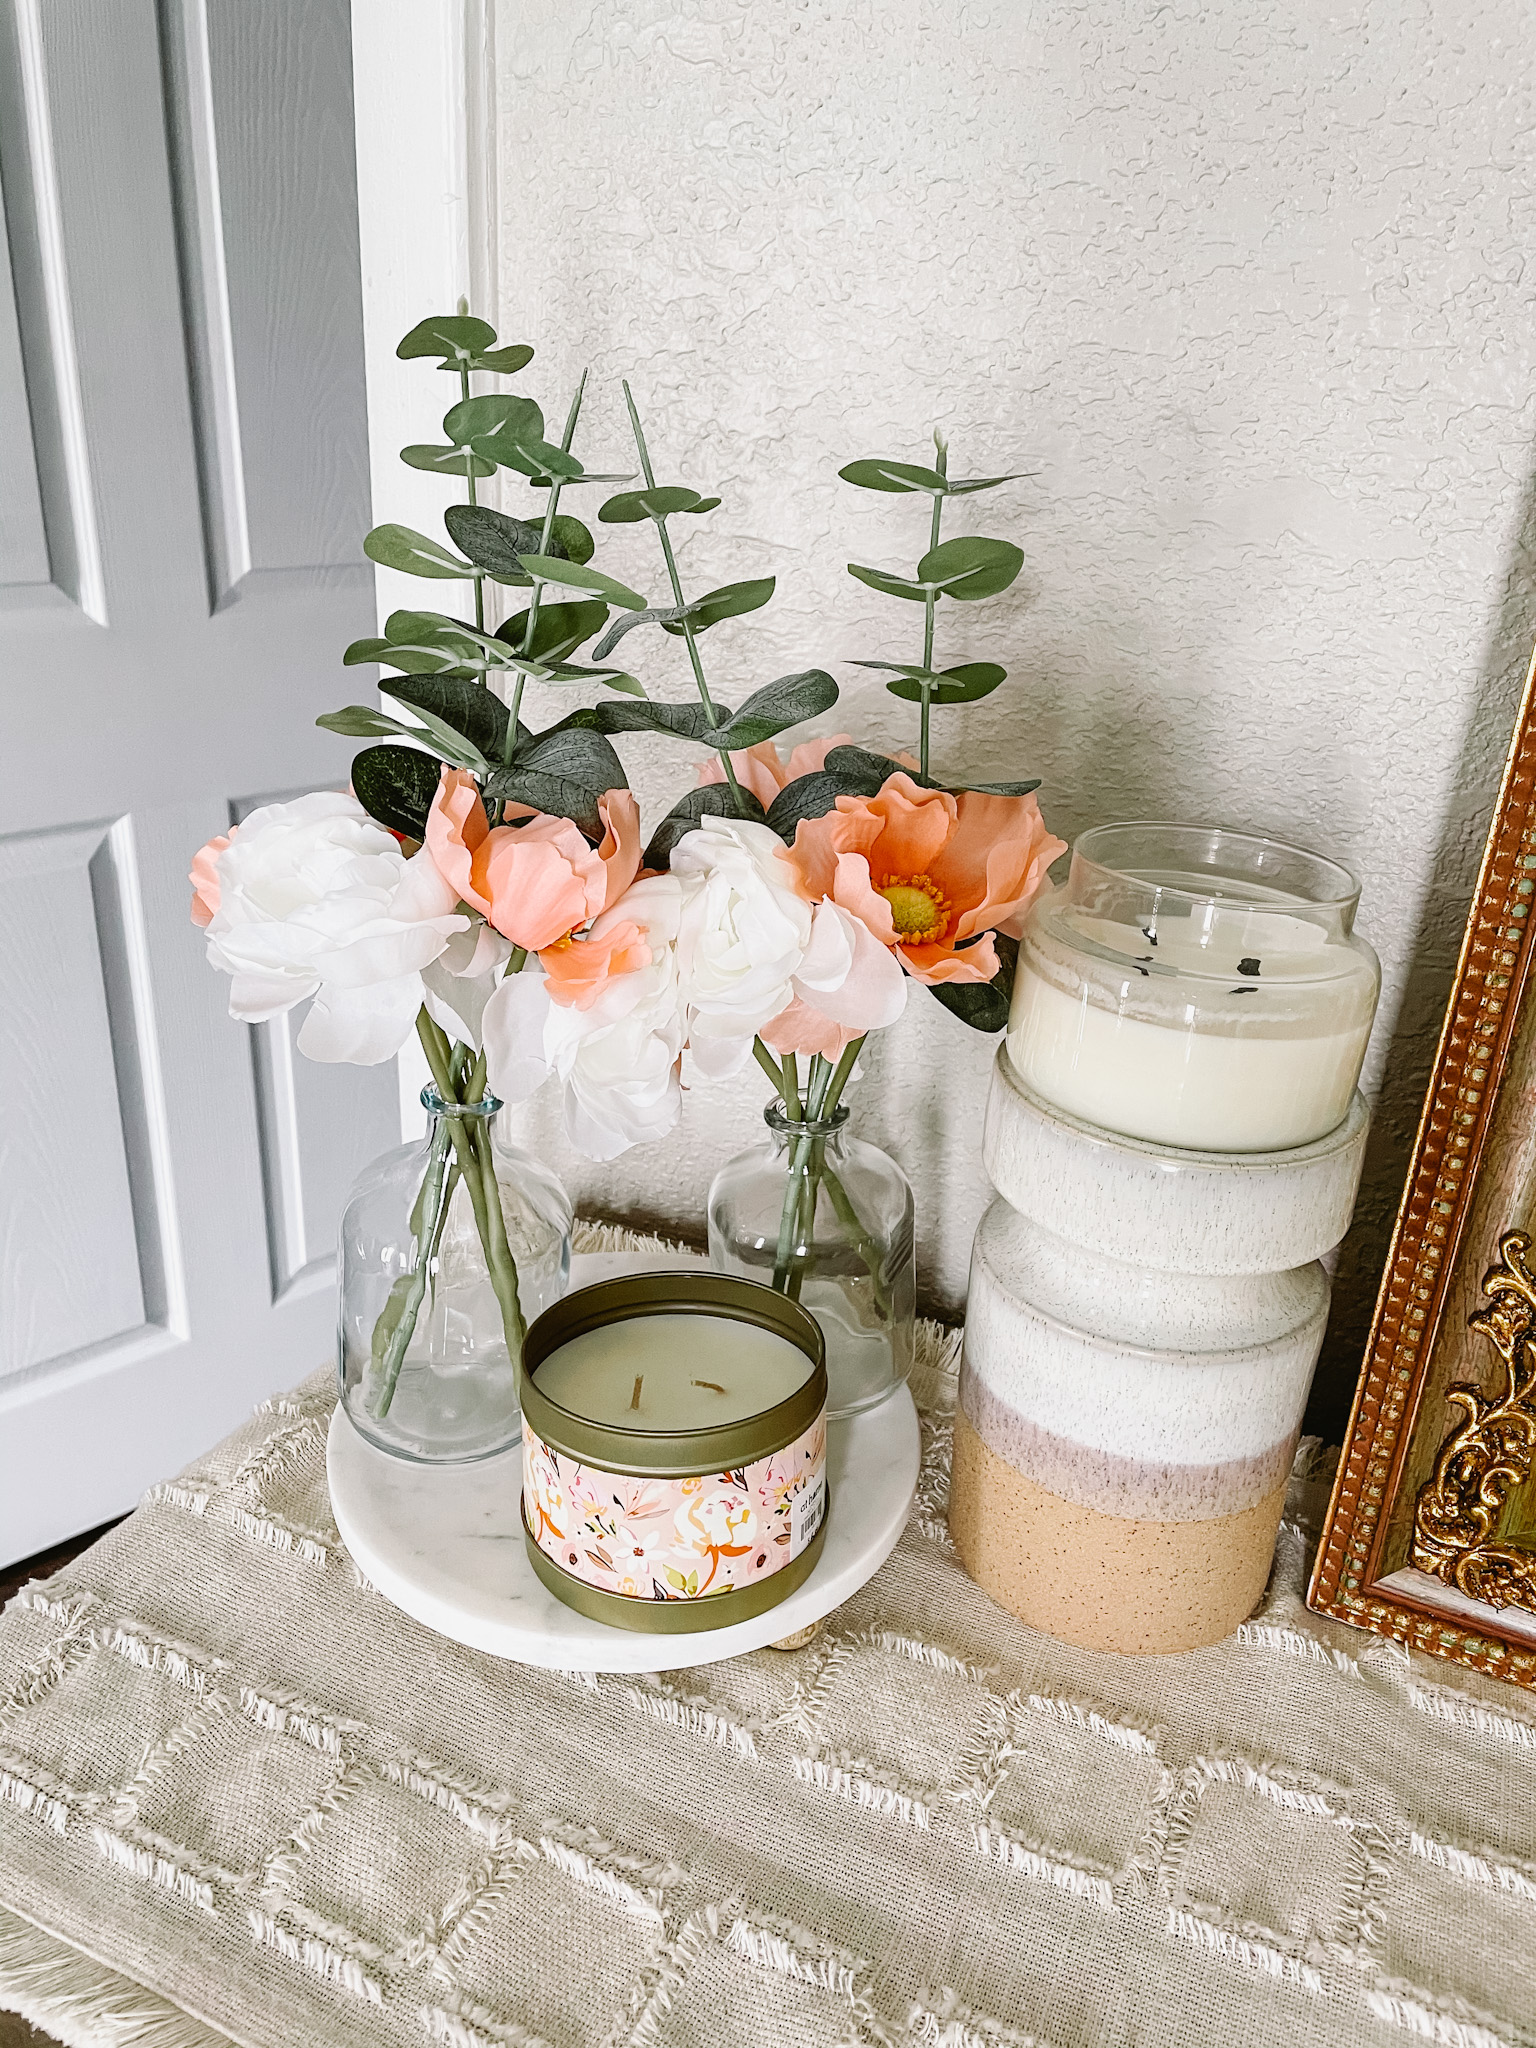 Target Home Decor Ideas: Spring 2021 | Affordable by Amanda